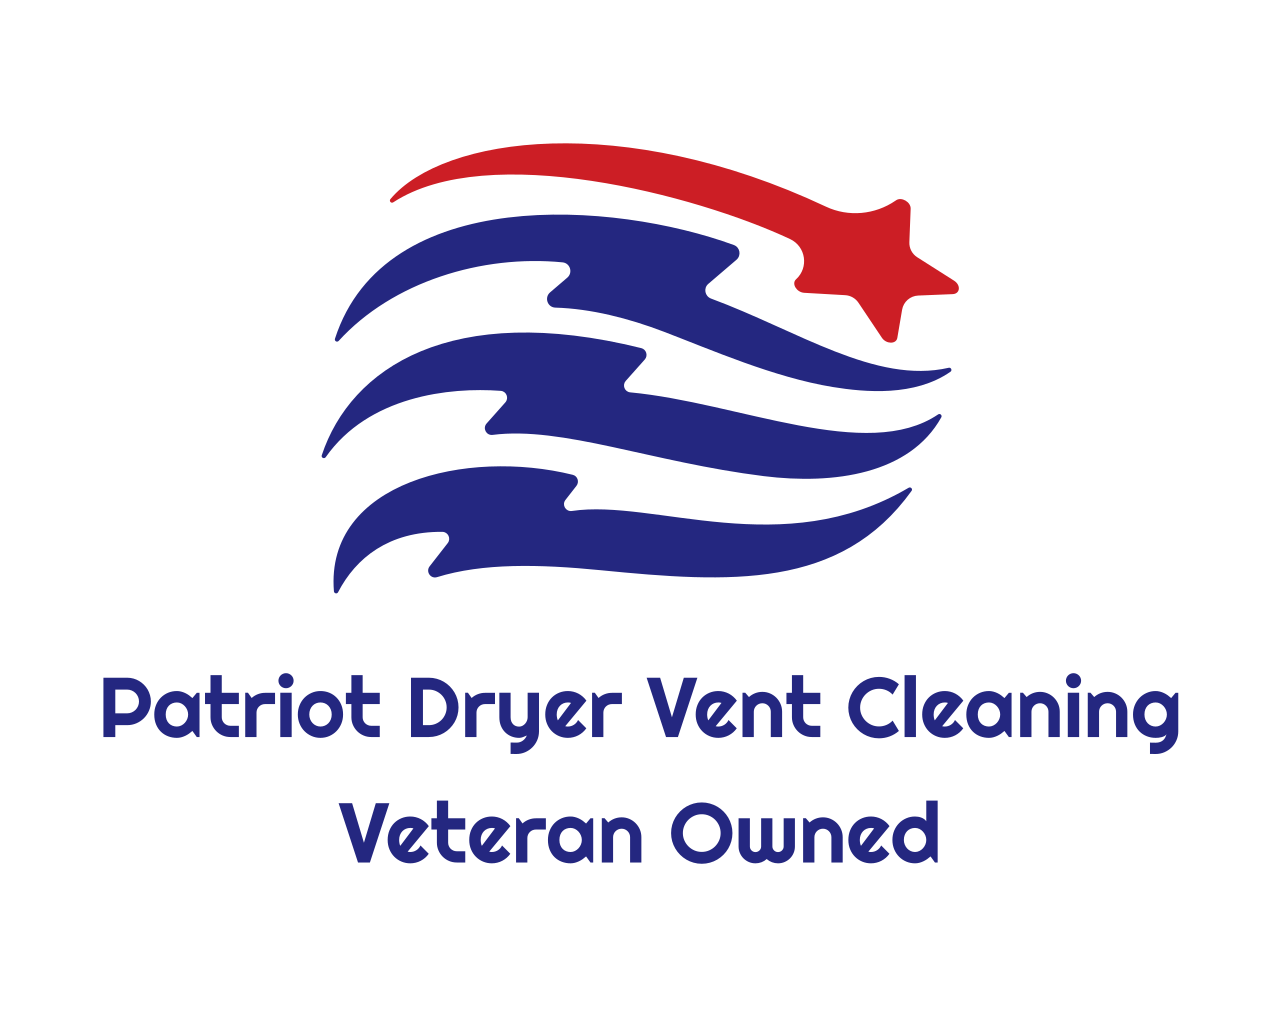 Patriot Dryer Vent Cleaning